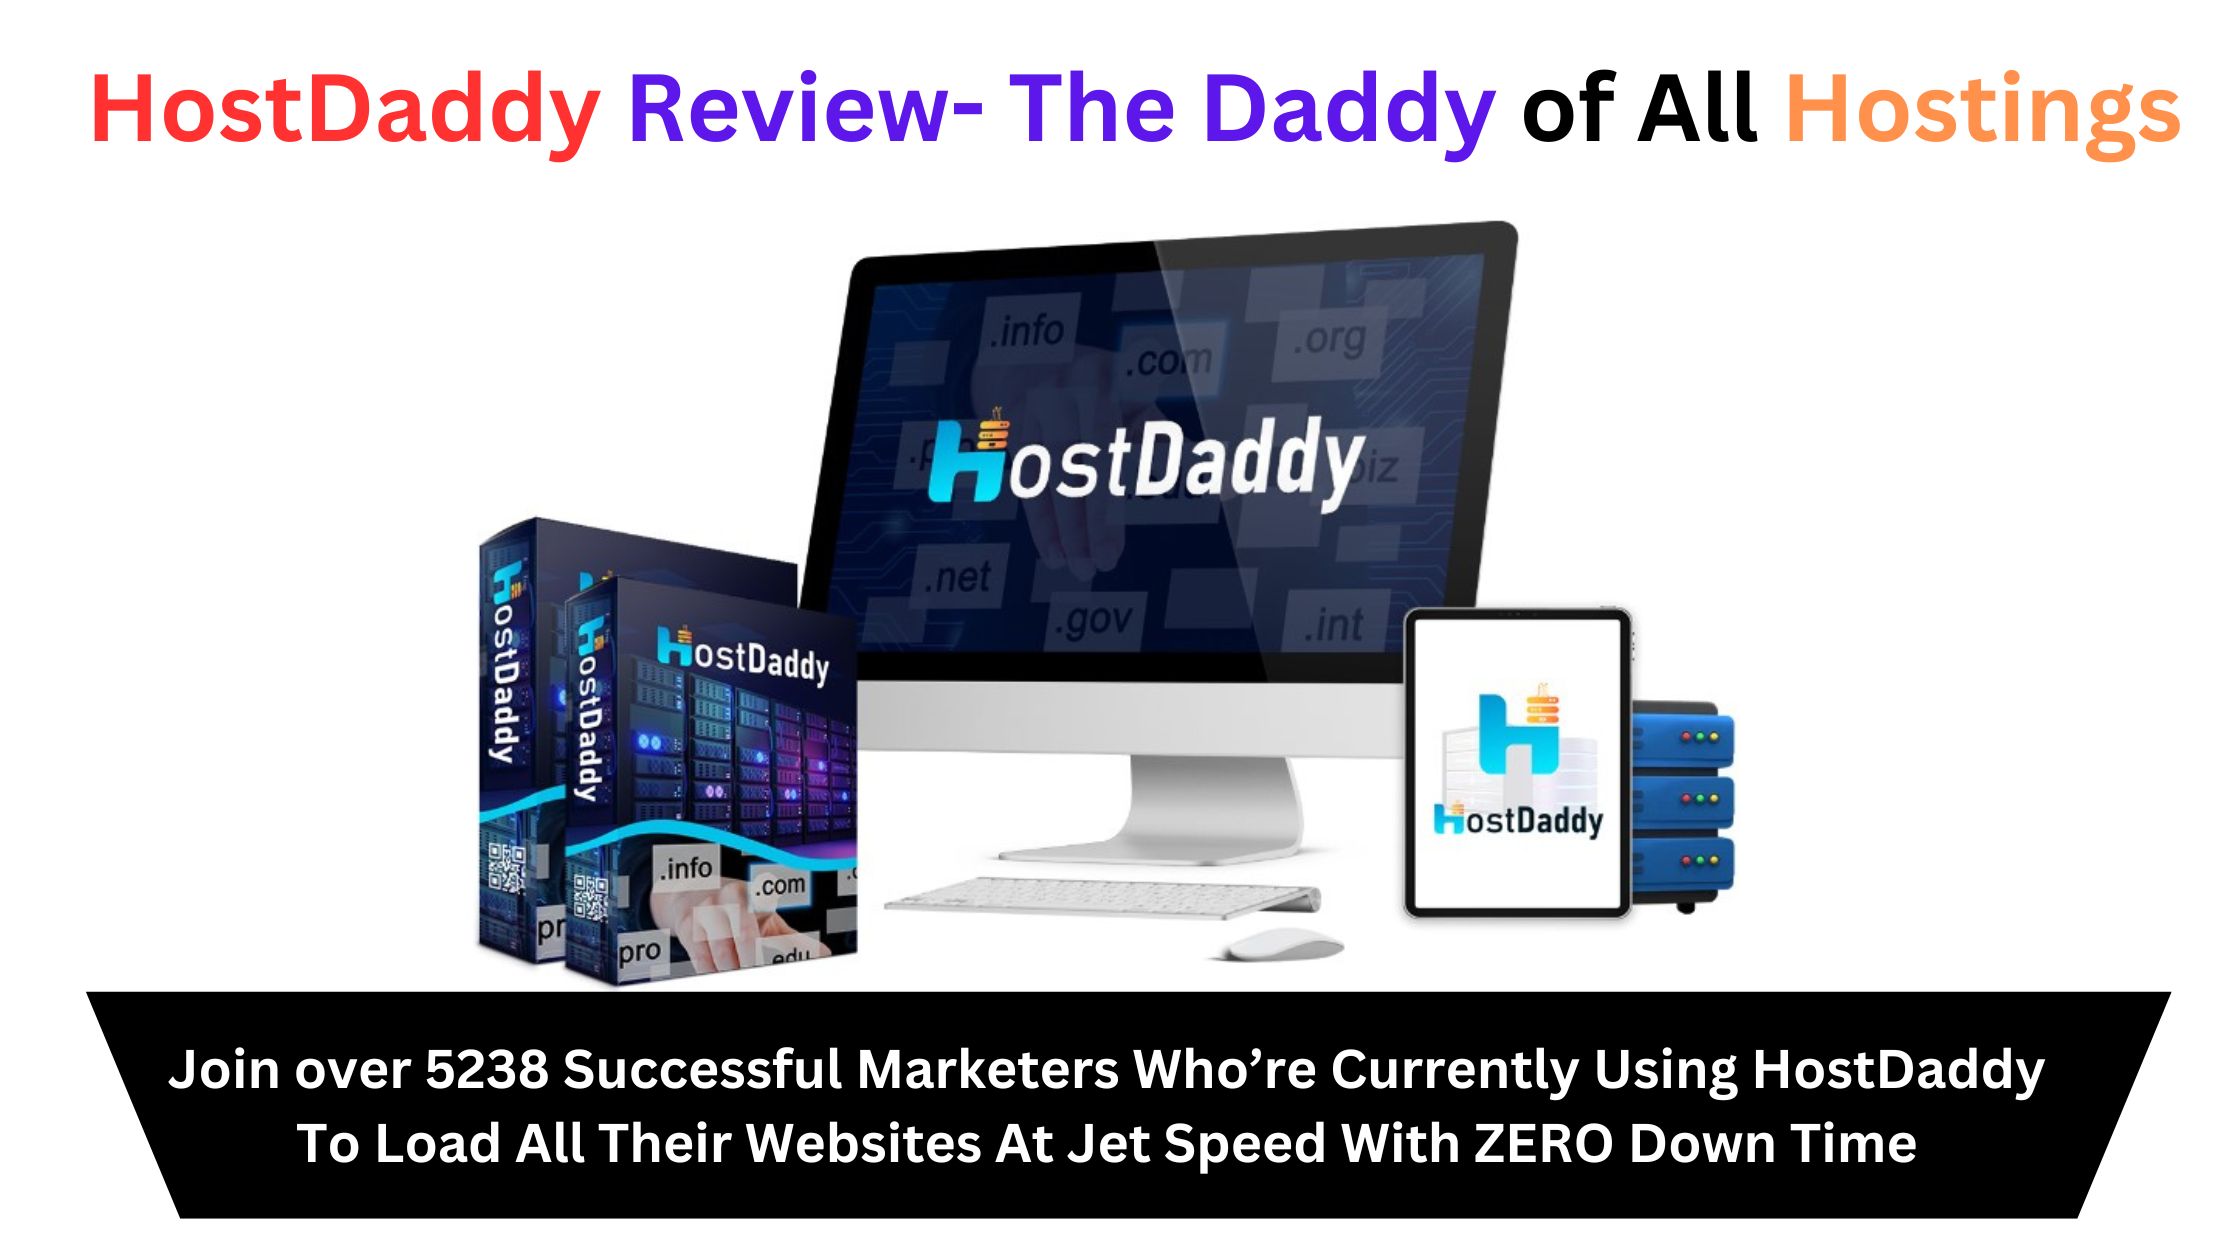 HostDaddy Review  The Daddy of All Hostings